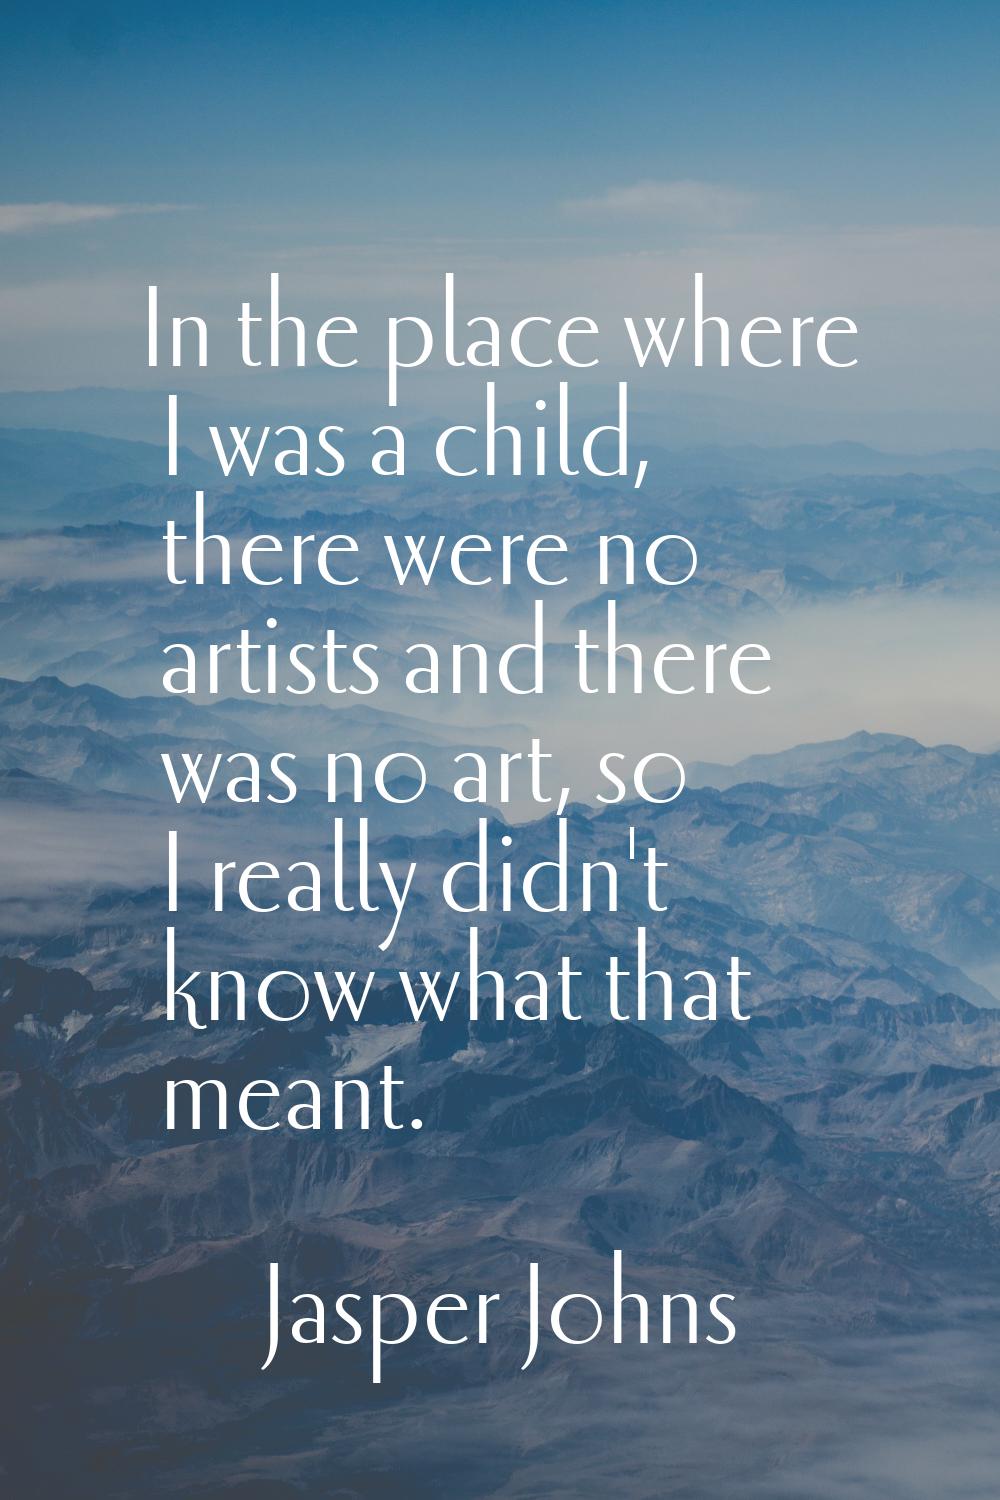 In the place where I was a child, there were no artists and there was no art, so I really didn't kn